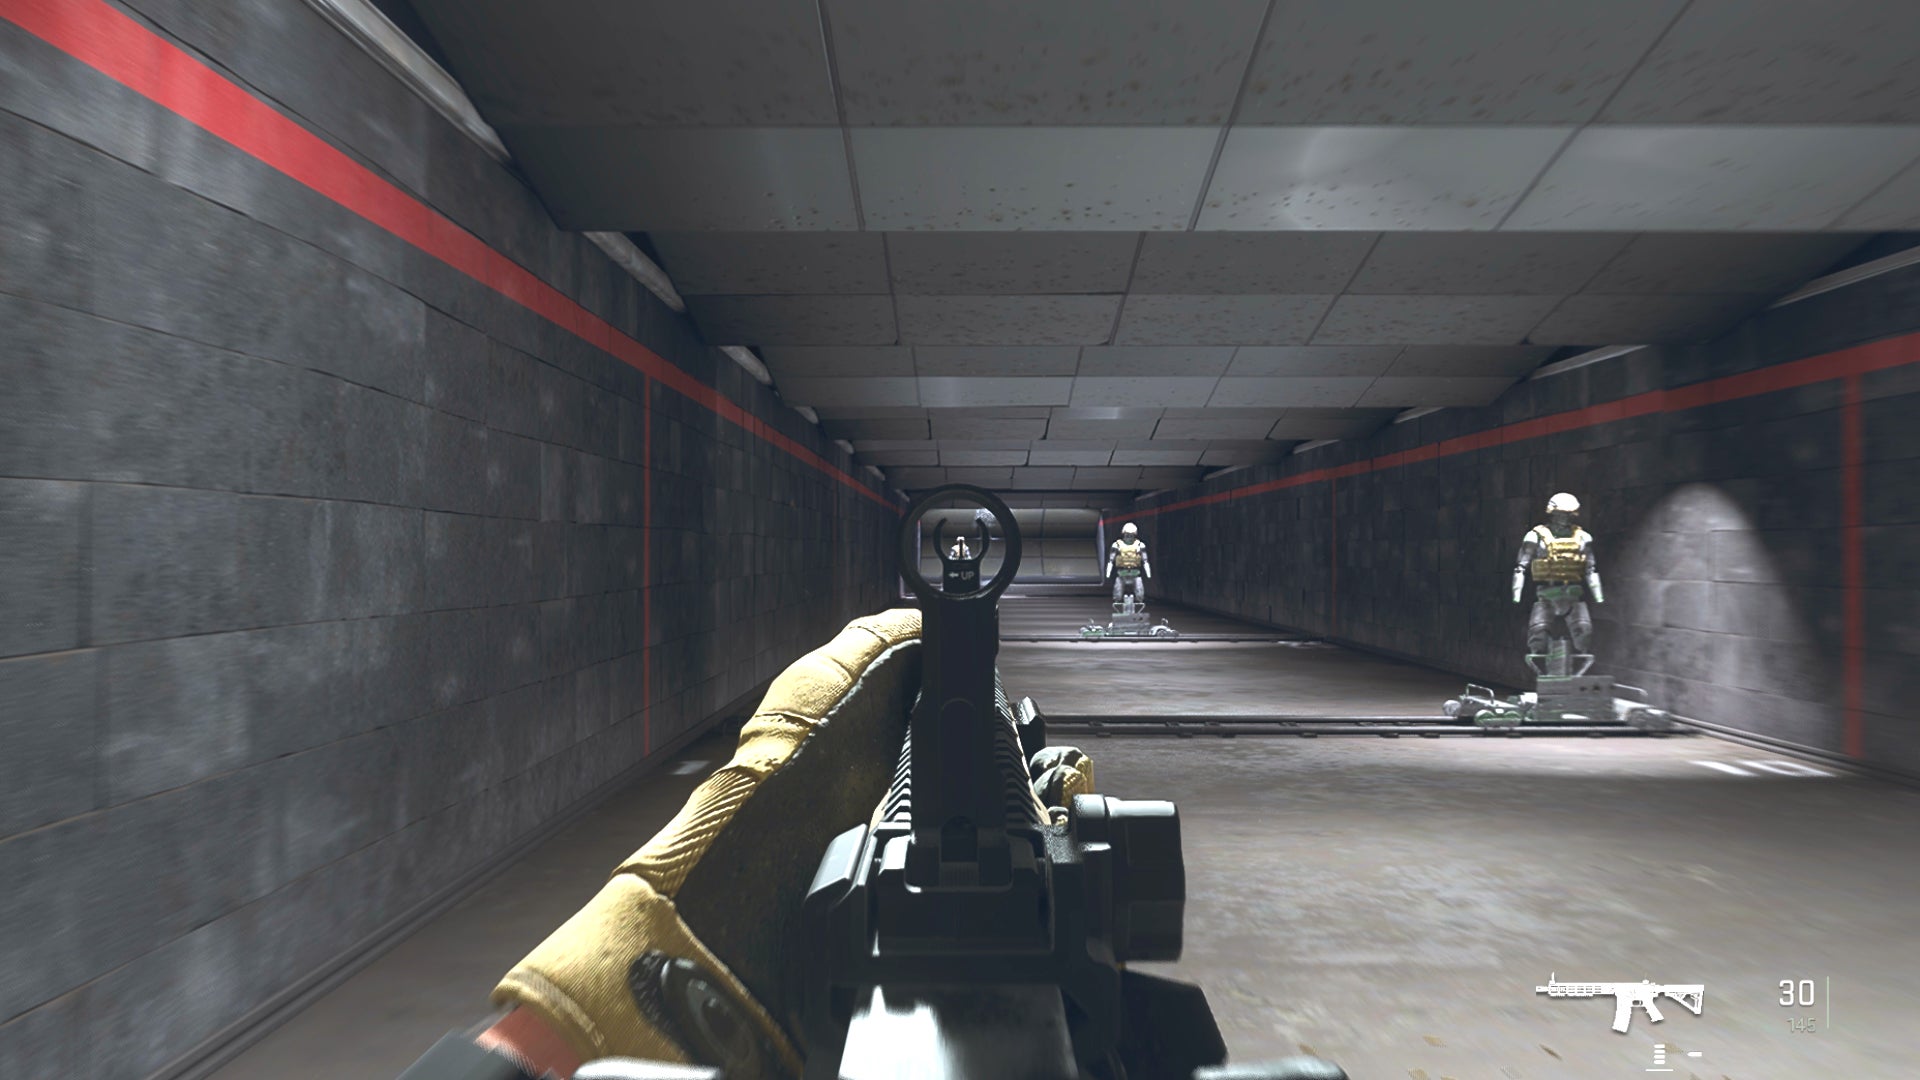 The player in Warzone 2.0 aims at a training dummy with the M4 ironsights.